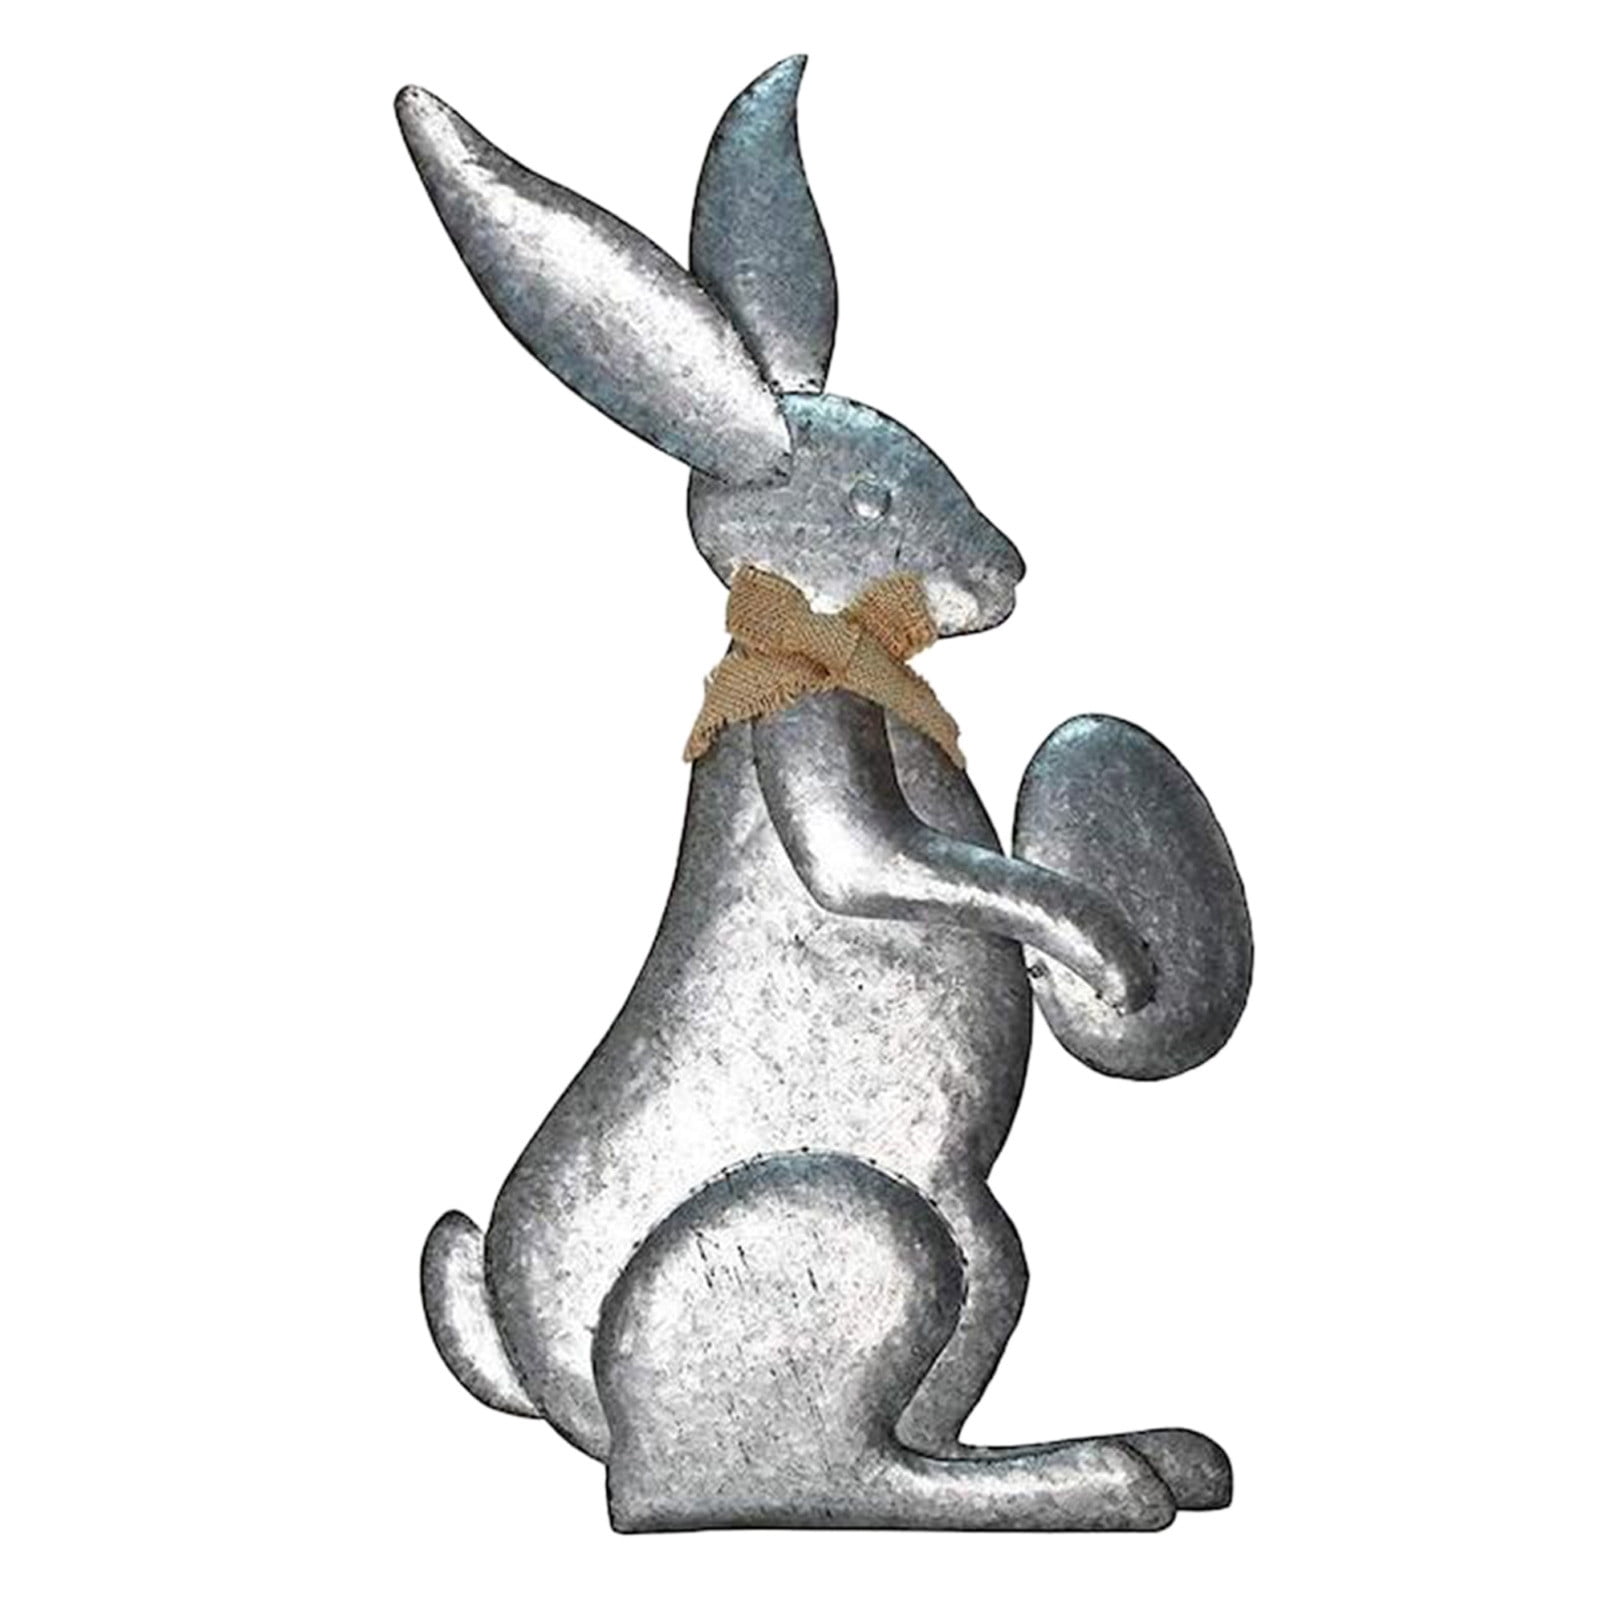 5d Diy Diamond Painting Easter Decoration Rabbit Easter Eggs With Stand  Wall Decor Entrance